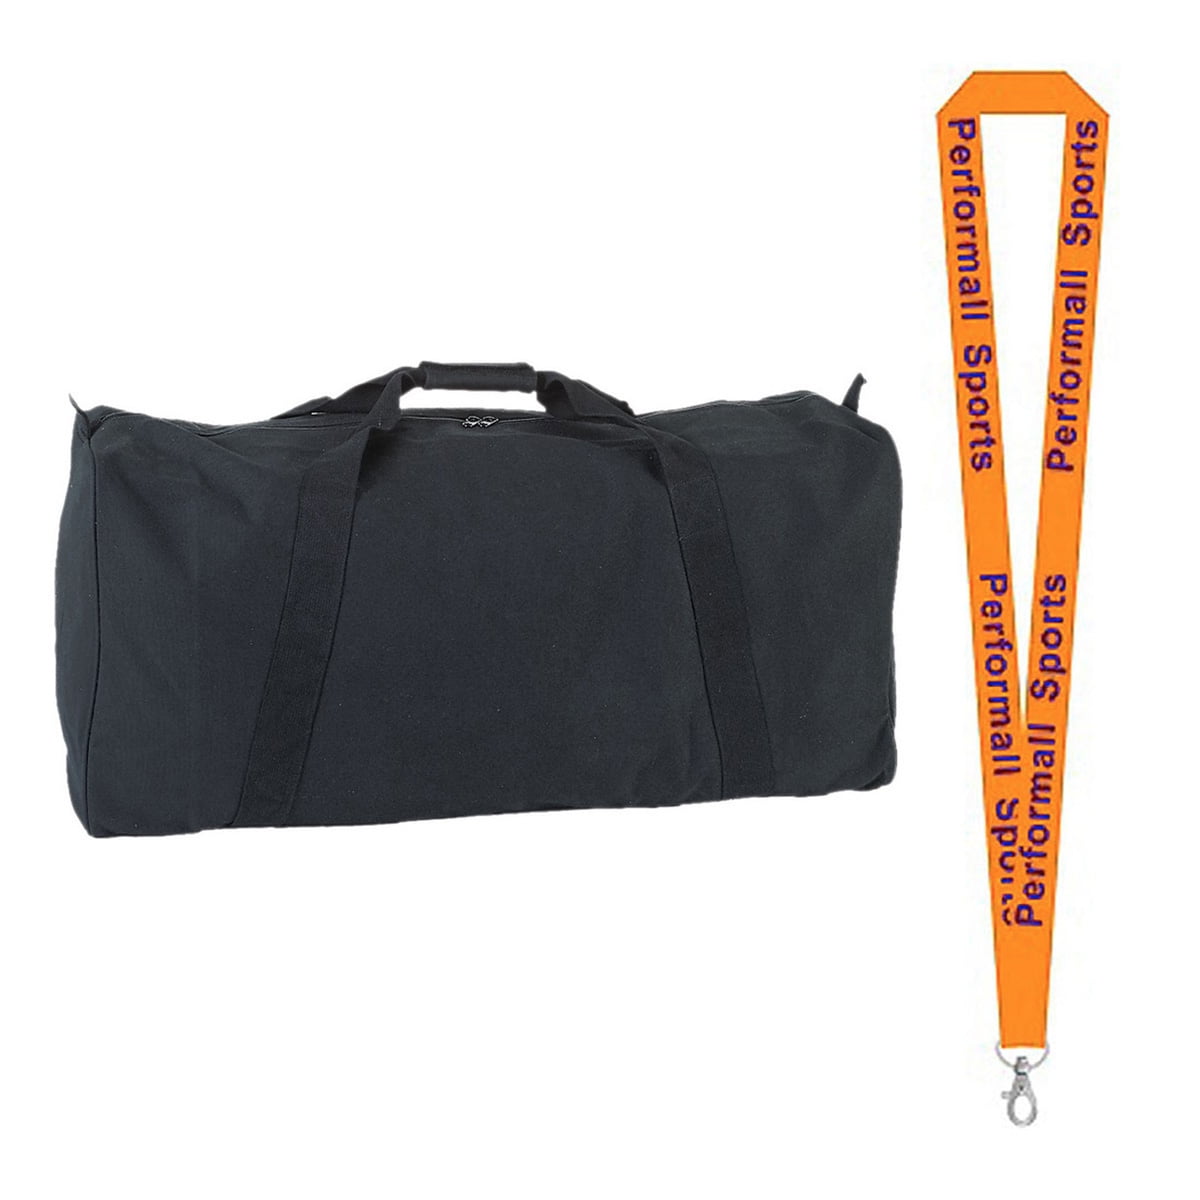 Champion Sports Bundle: 22 oz. Canvas Zippered Duffle Bag Black with 1 Performall Lanyard ...